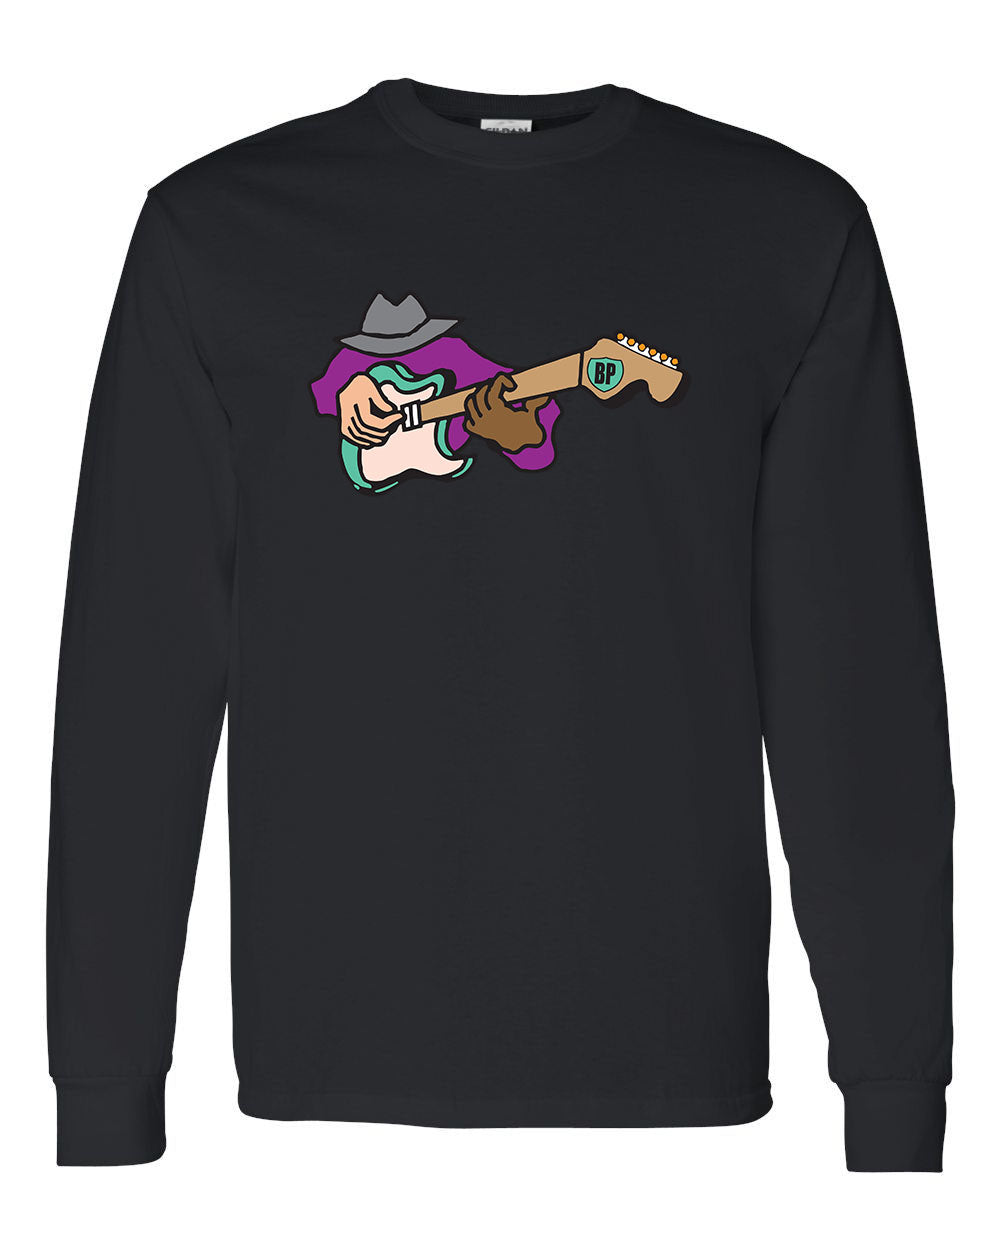 Special Limited Edition Bill Perry Guitar Dude Long Sleeve